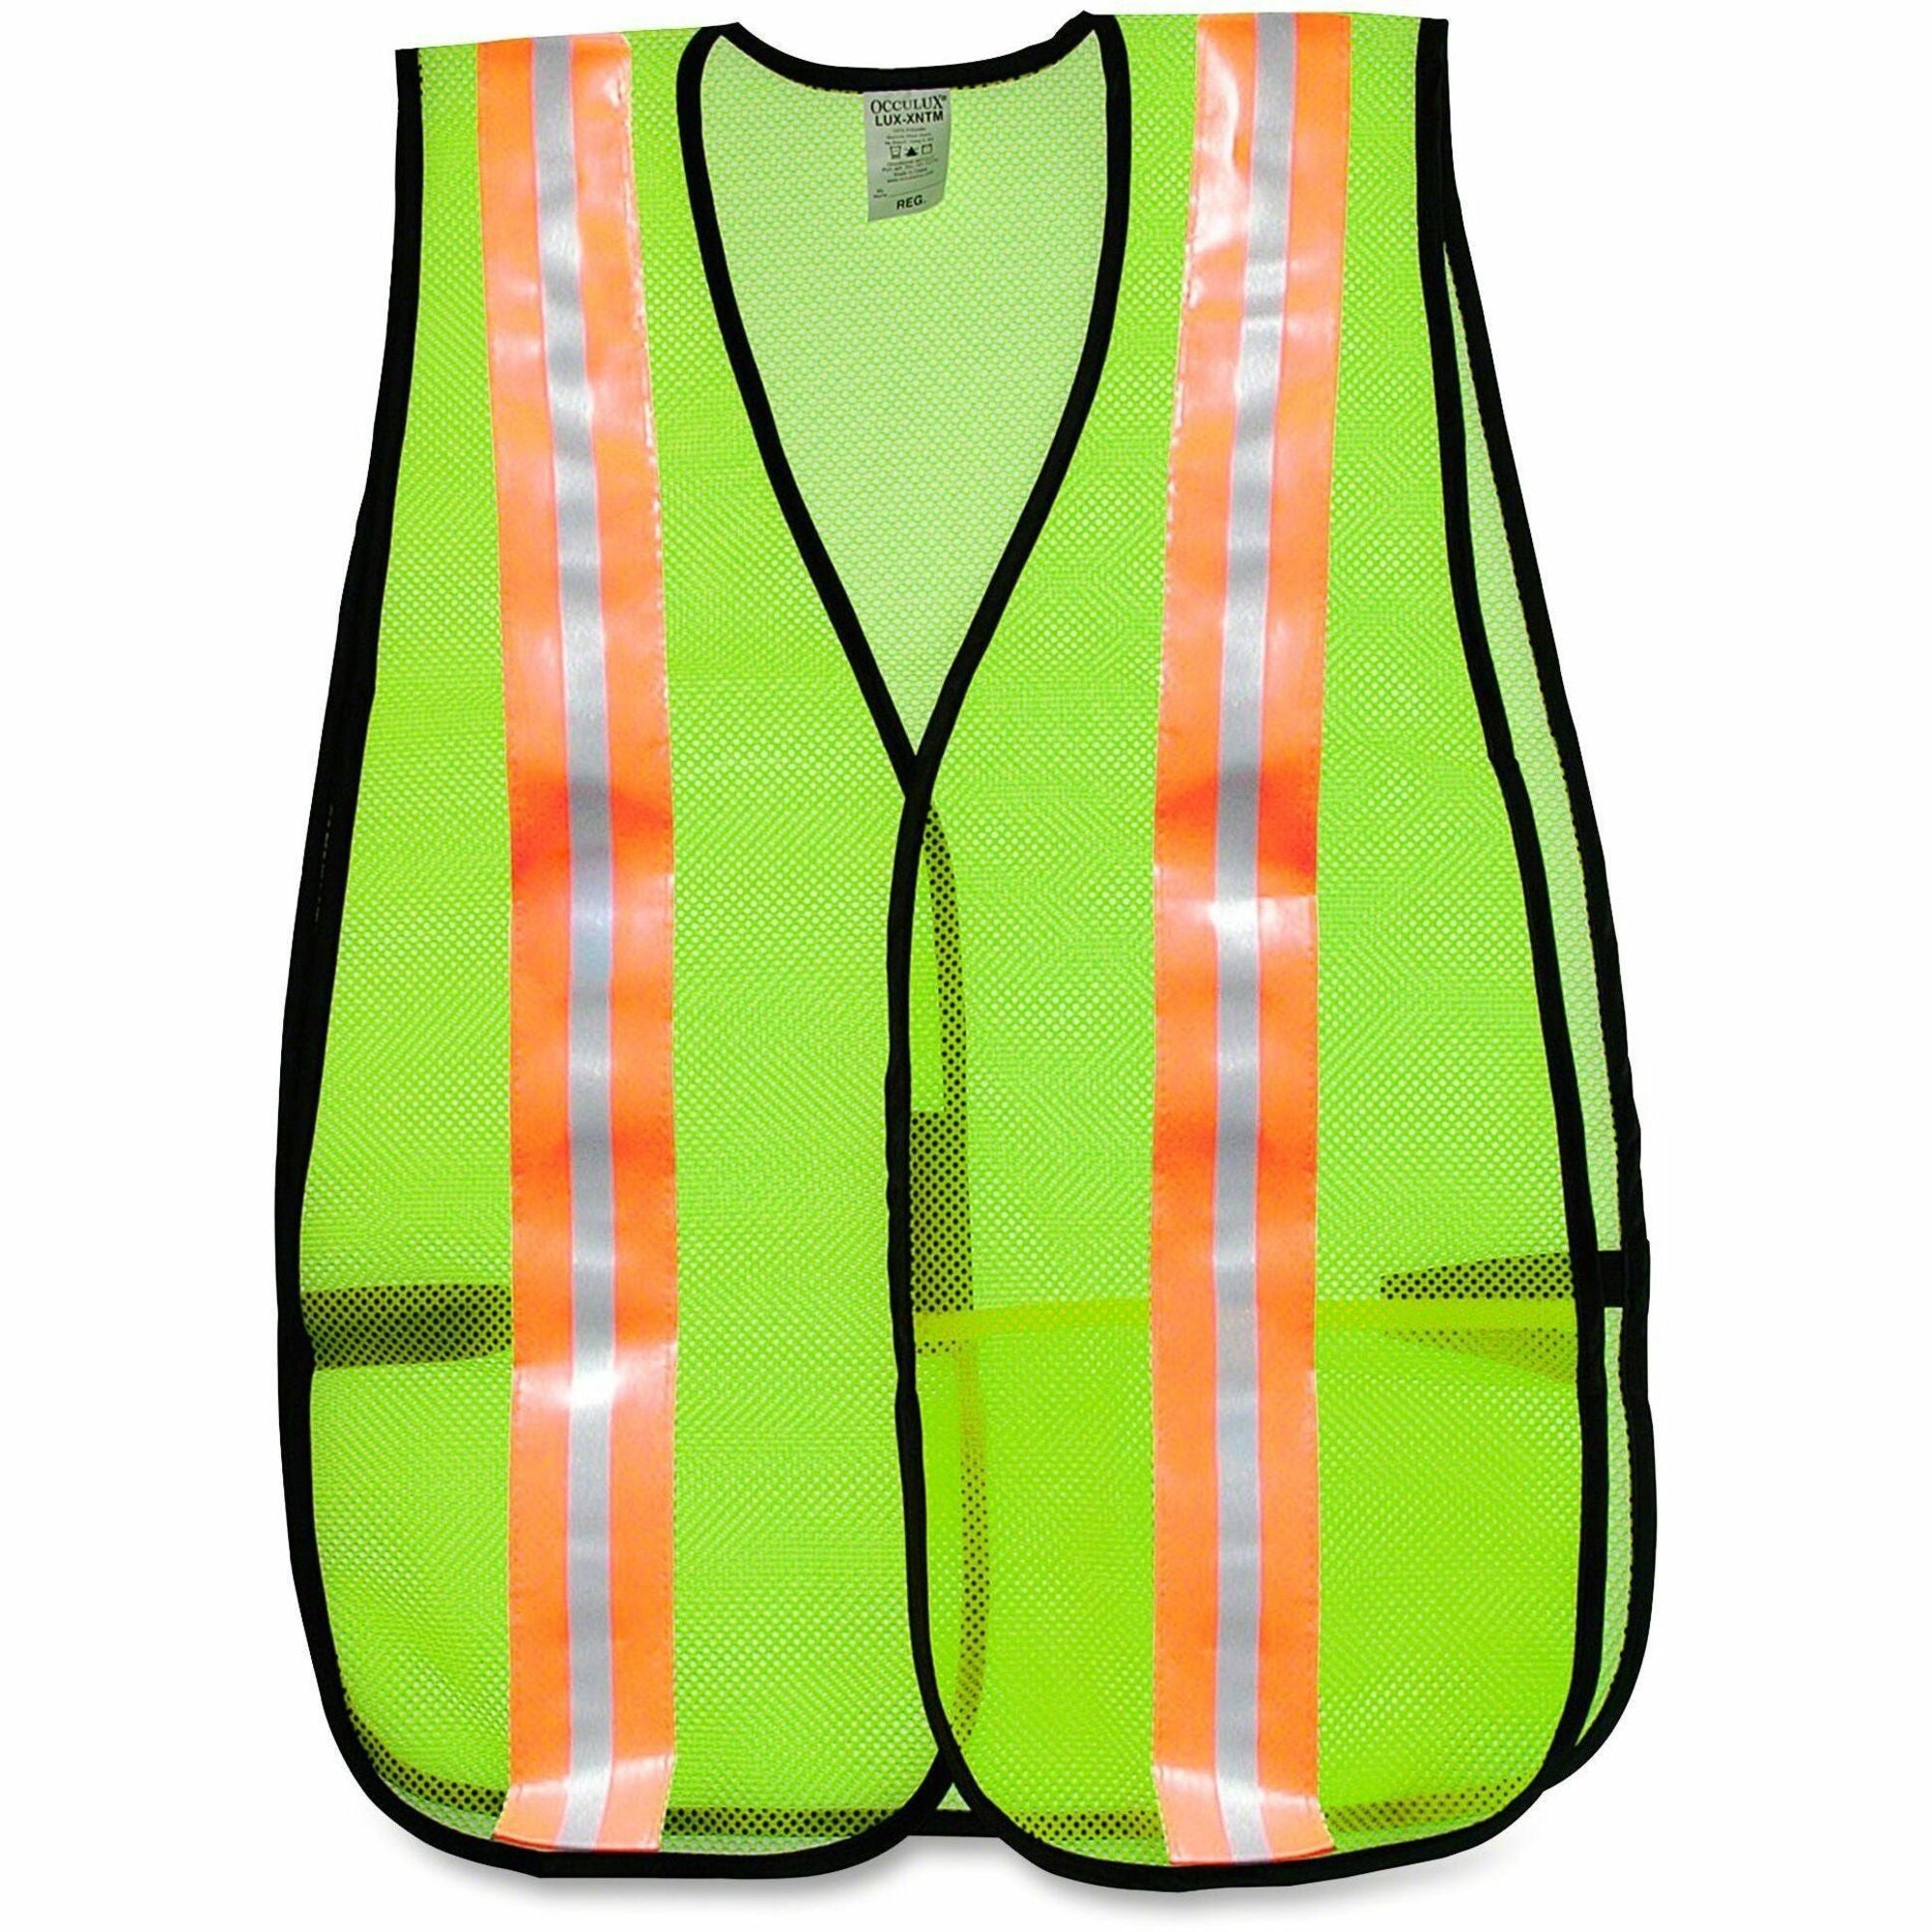 MCR Safety Mesh General Purpose Safety Vest - Visibility Protection - Mesh - Lime - Reflective Strip, Lightweight - 1 Each - 